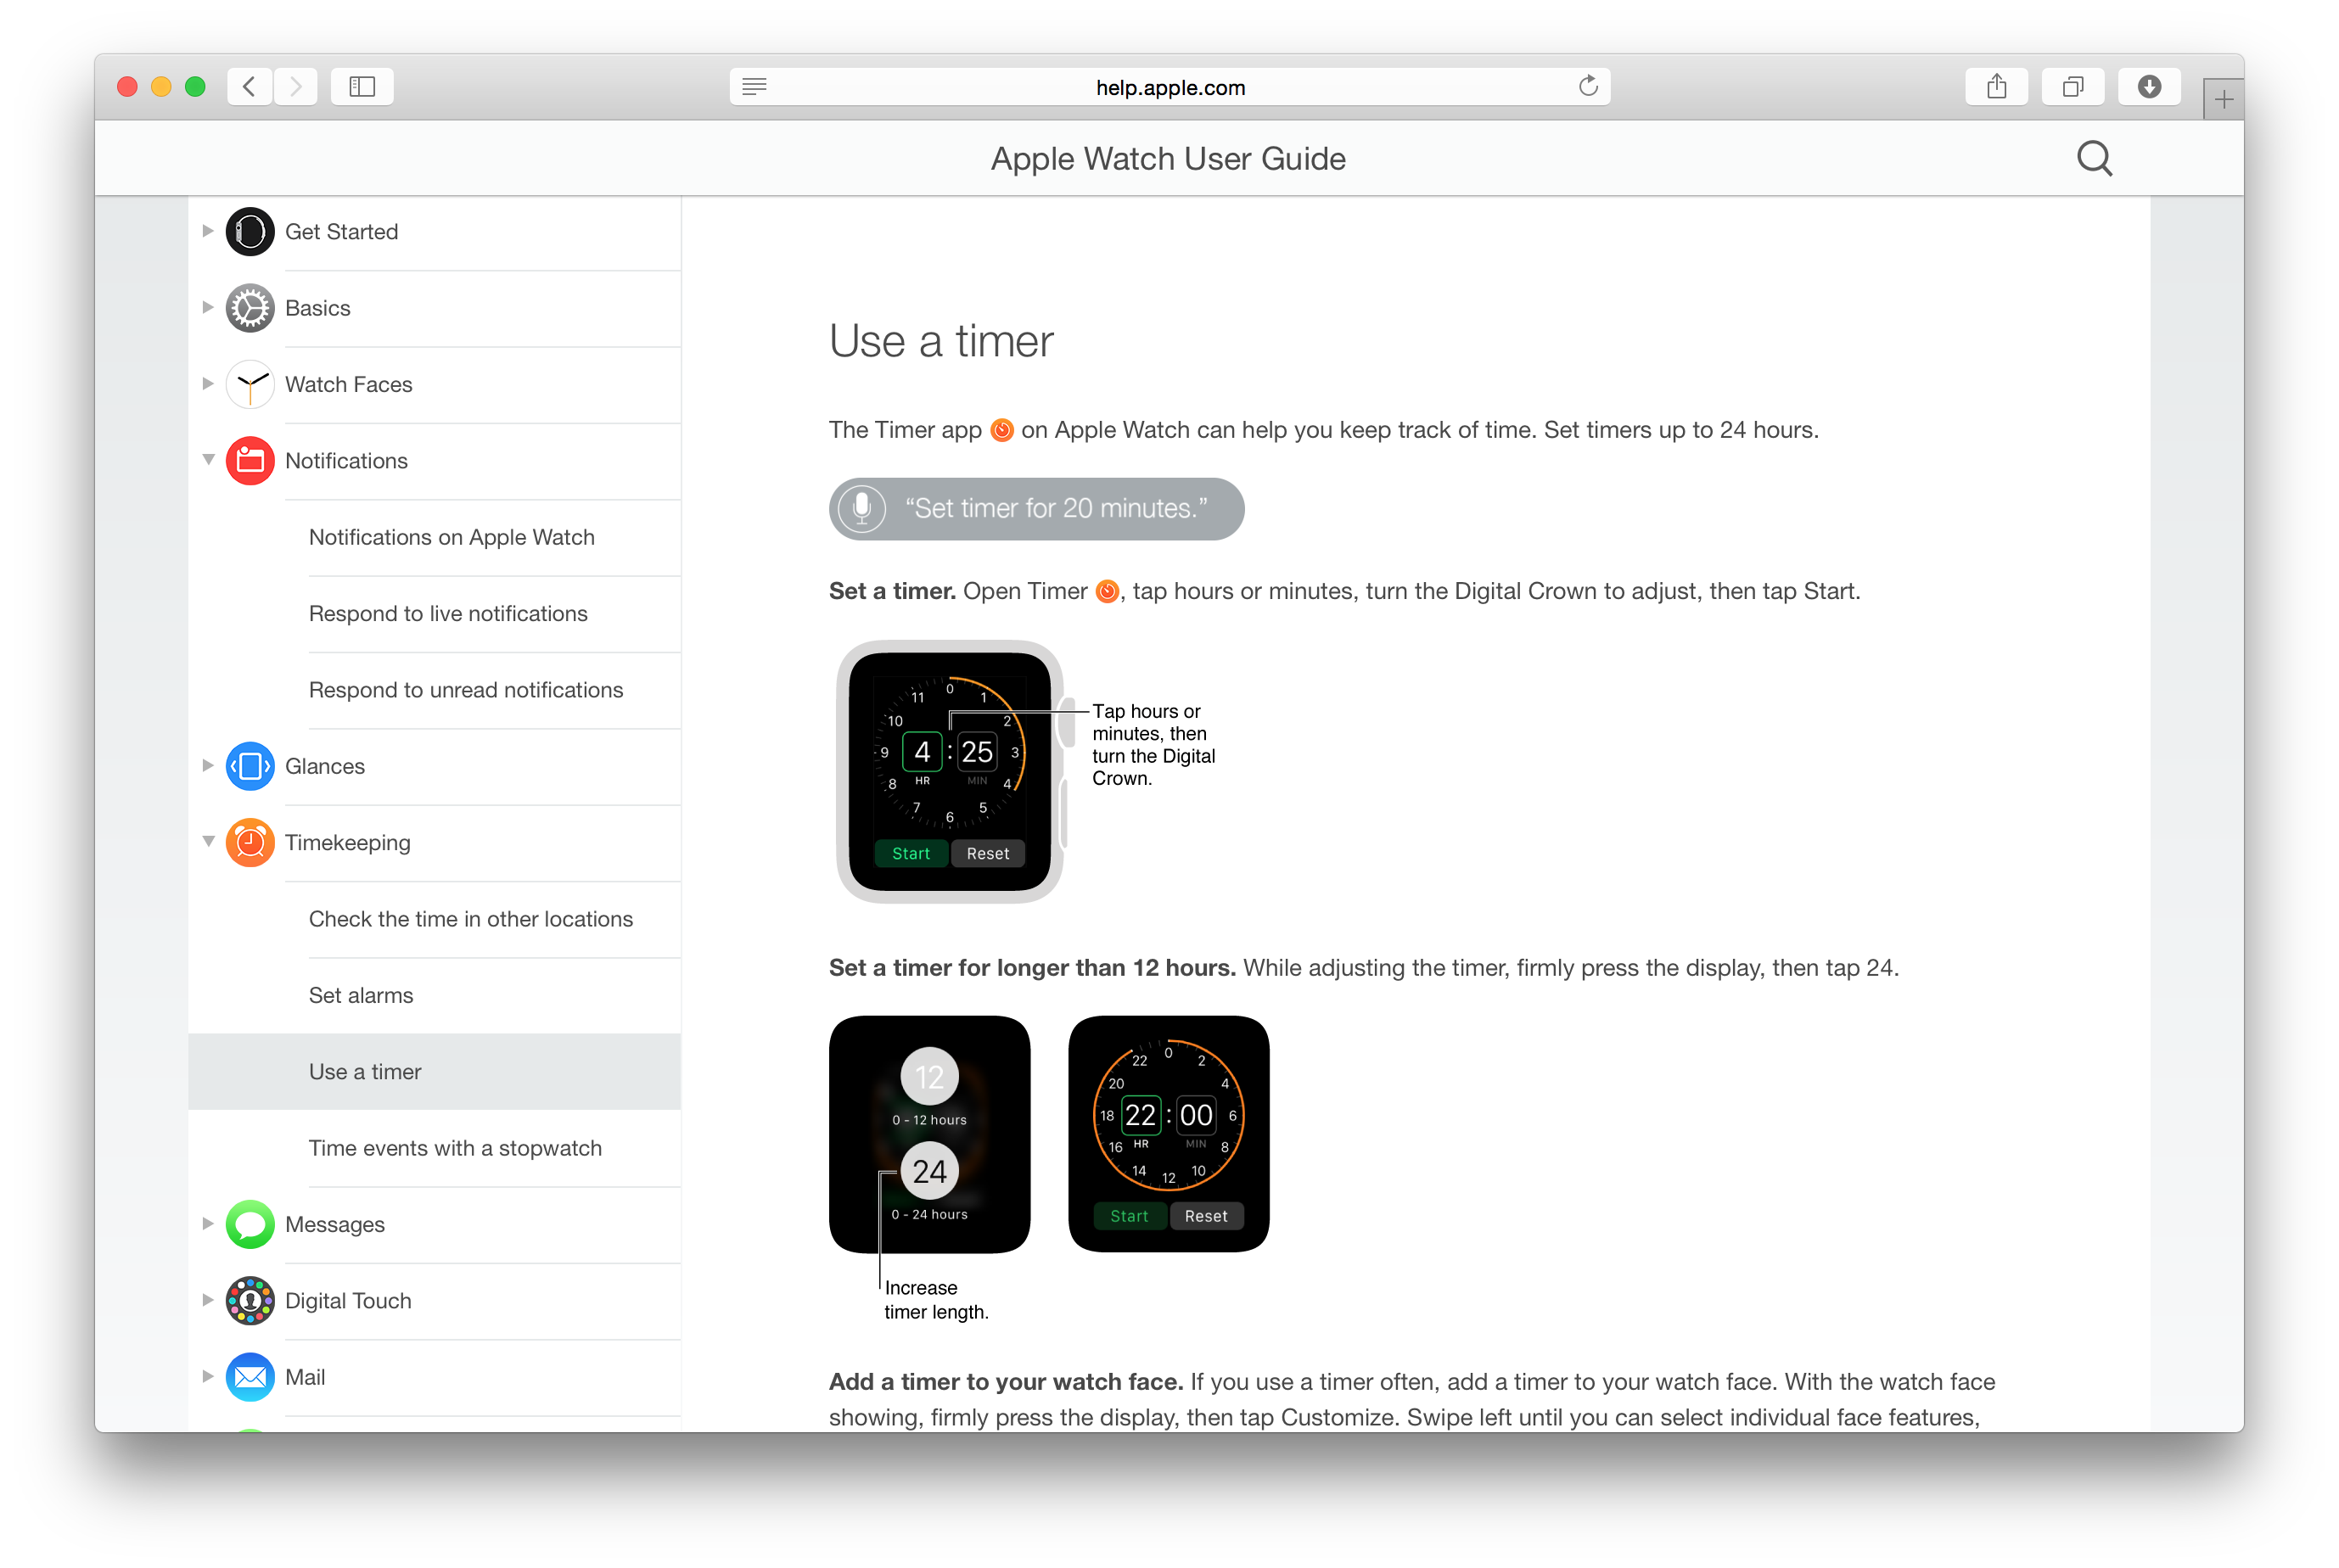 Apple publishes the Apple Watch User Guide online, explaining various